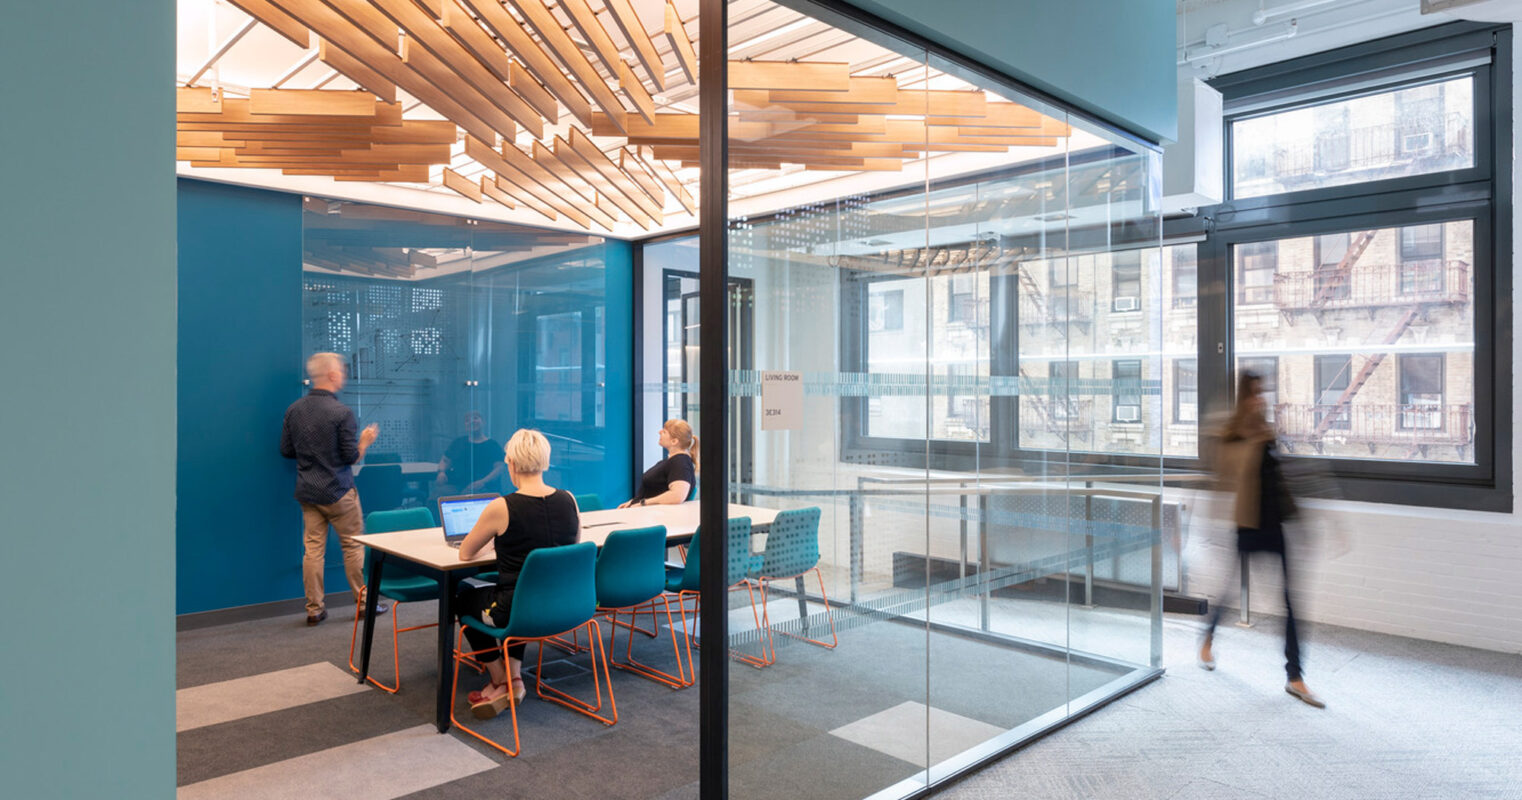 Contemporary office space featuring glass walls, a bold blue accent wall, and suspended wooden slats. Occupants seated at a table with modern chairs on a patterned gray carpet, engaging in a meeting, with natural light streaming through large windows.